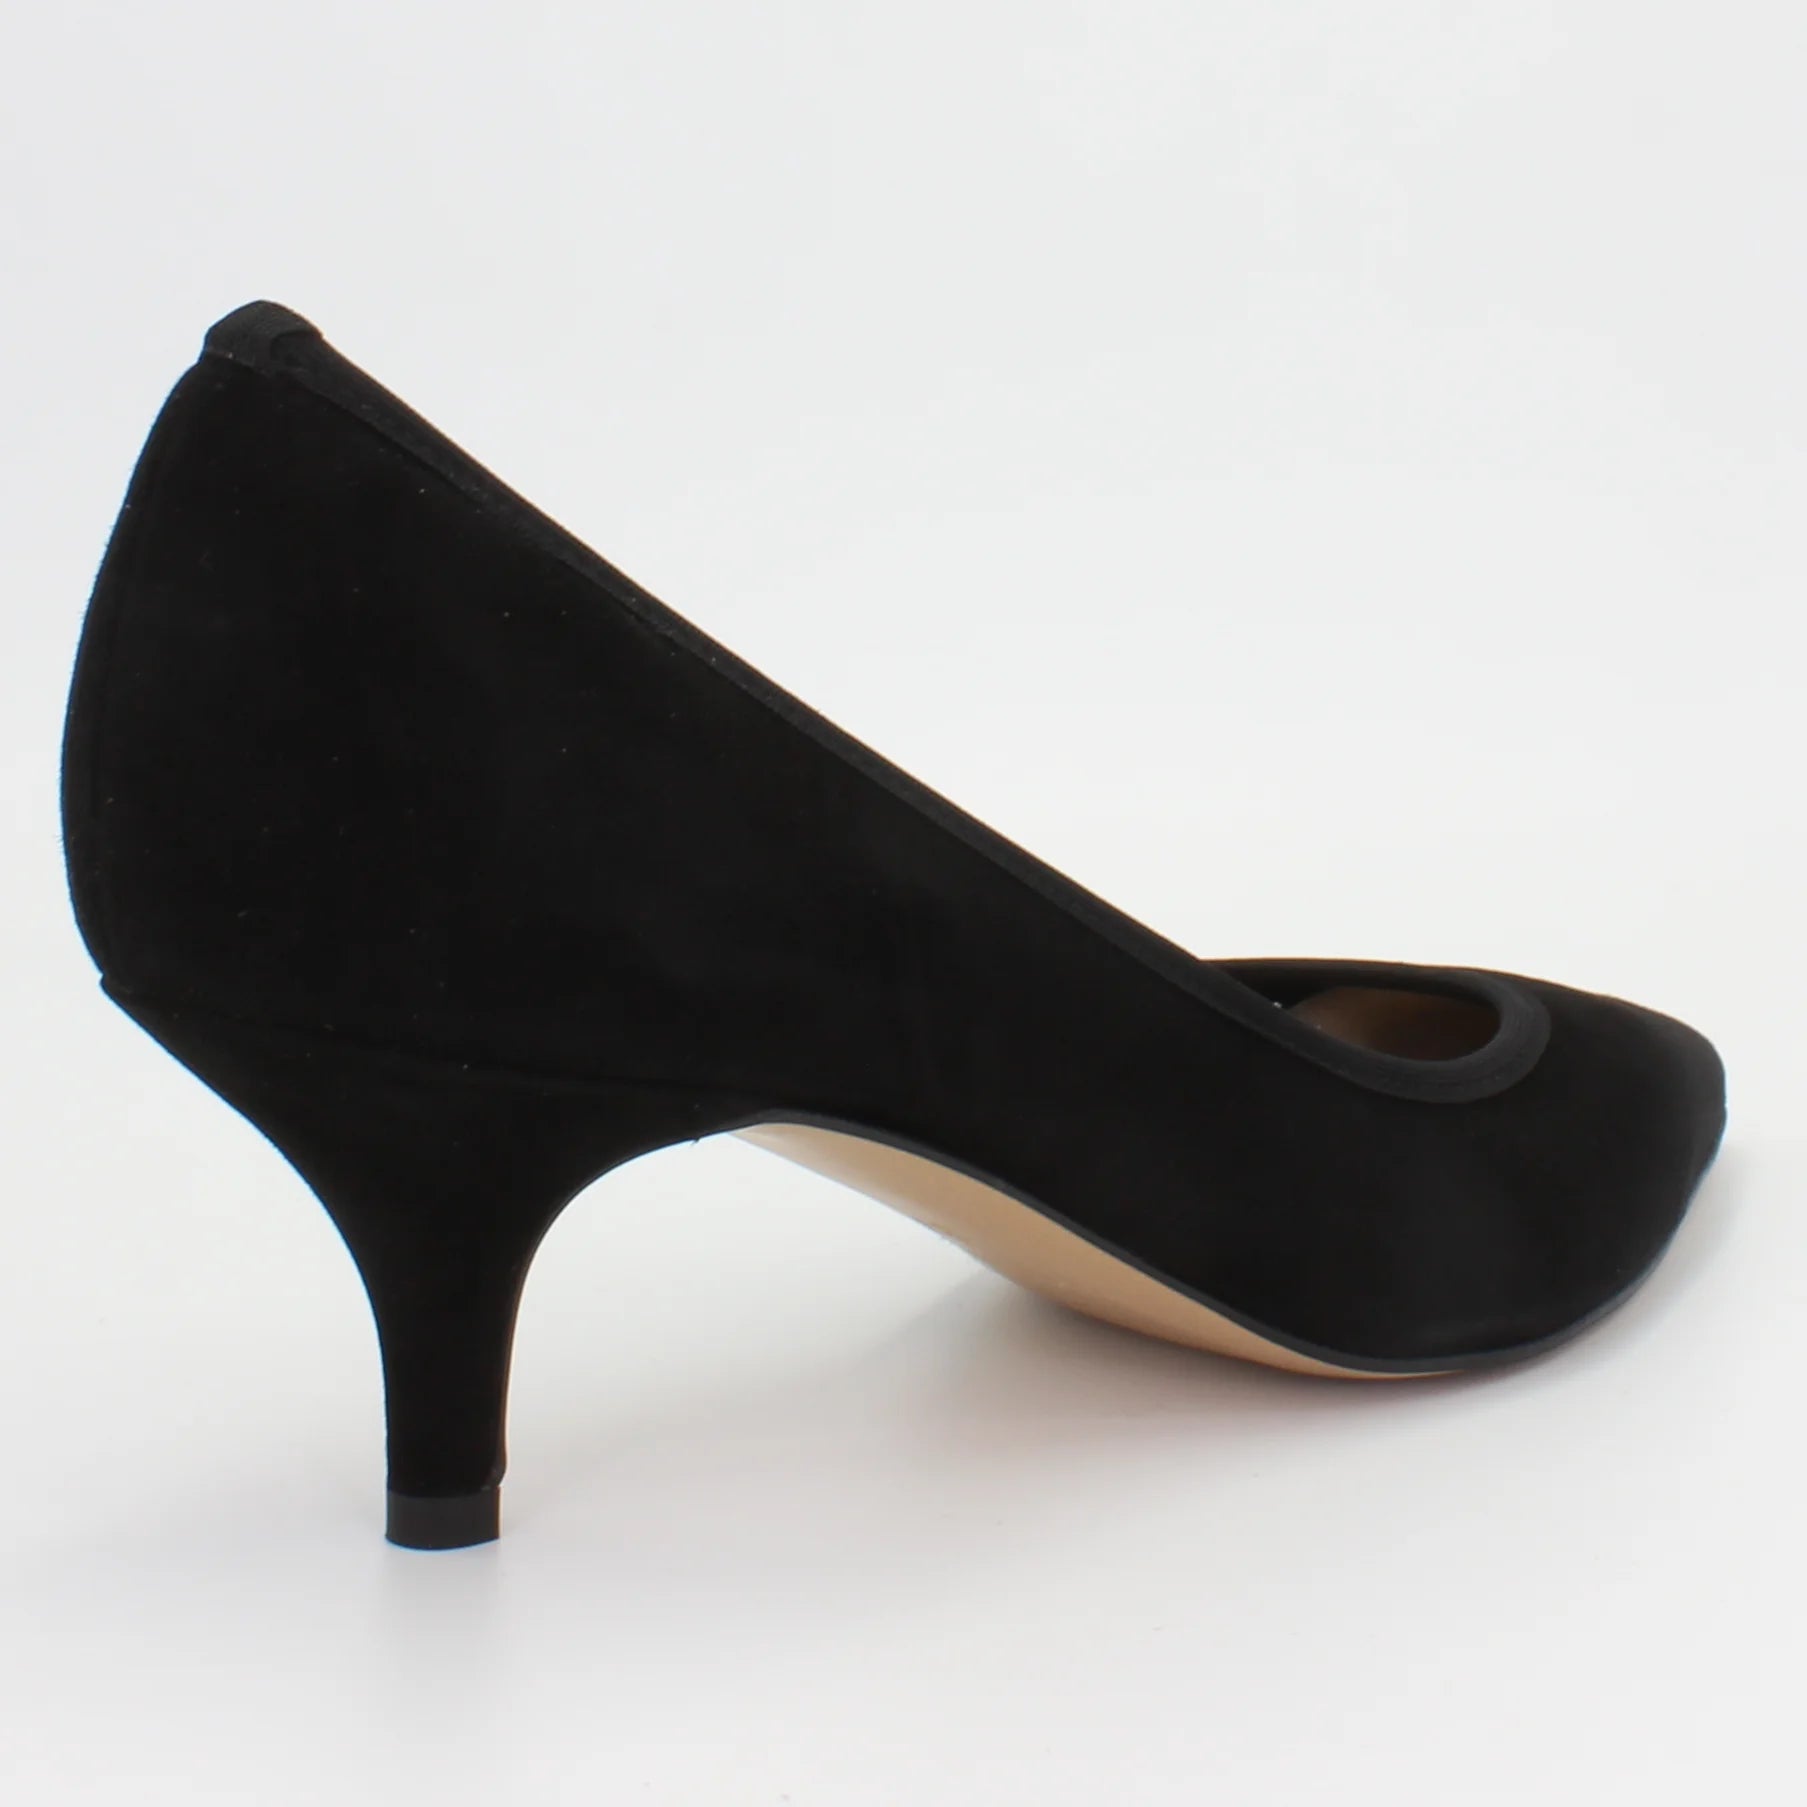 Shop Handmade Italian Leather Women's Low Court Heel in Suede Nero Black (CR543) or browse our range of hand-made Italian shoes for women in leather or suede in-store at Aliverti Cape Town, or shop online. We deliver in South Africa & offer multiple payment plans as well as accept multiple safe & secure payment methods.